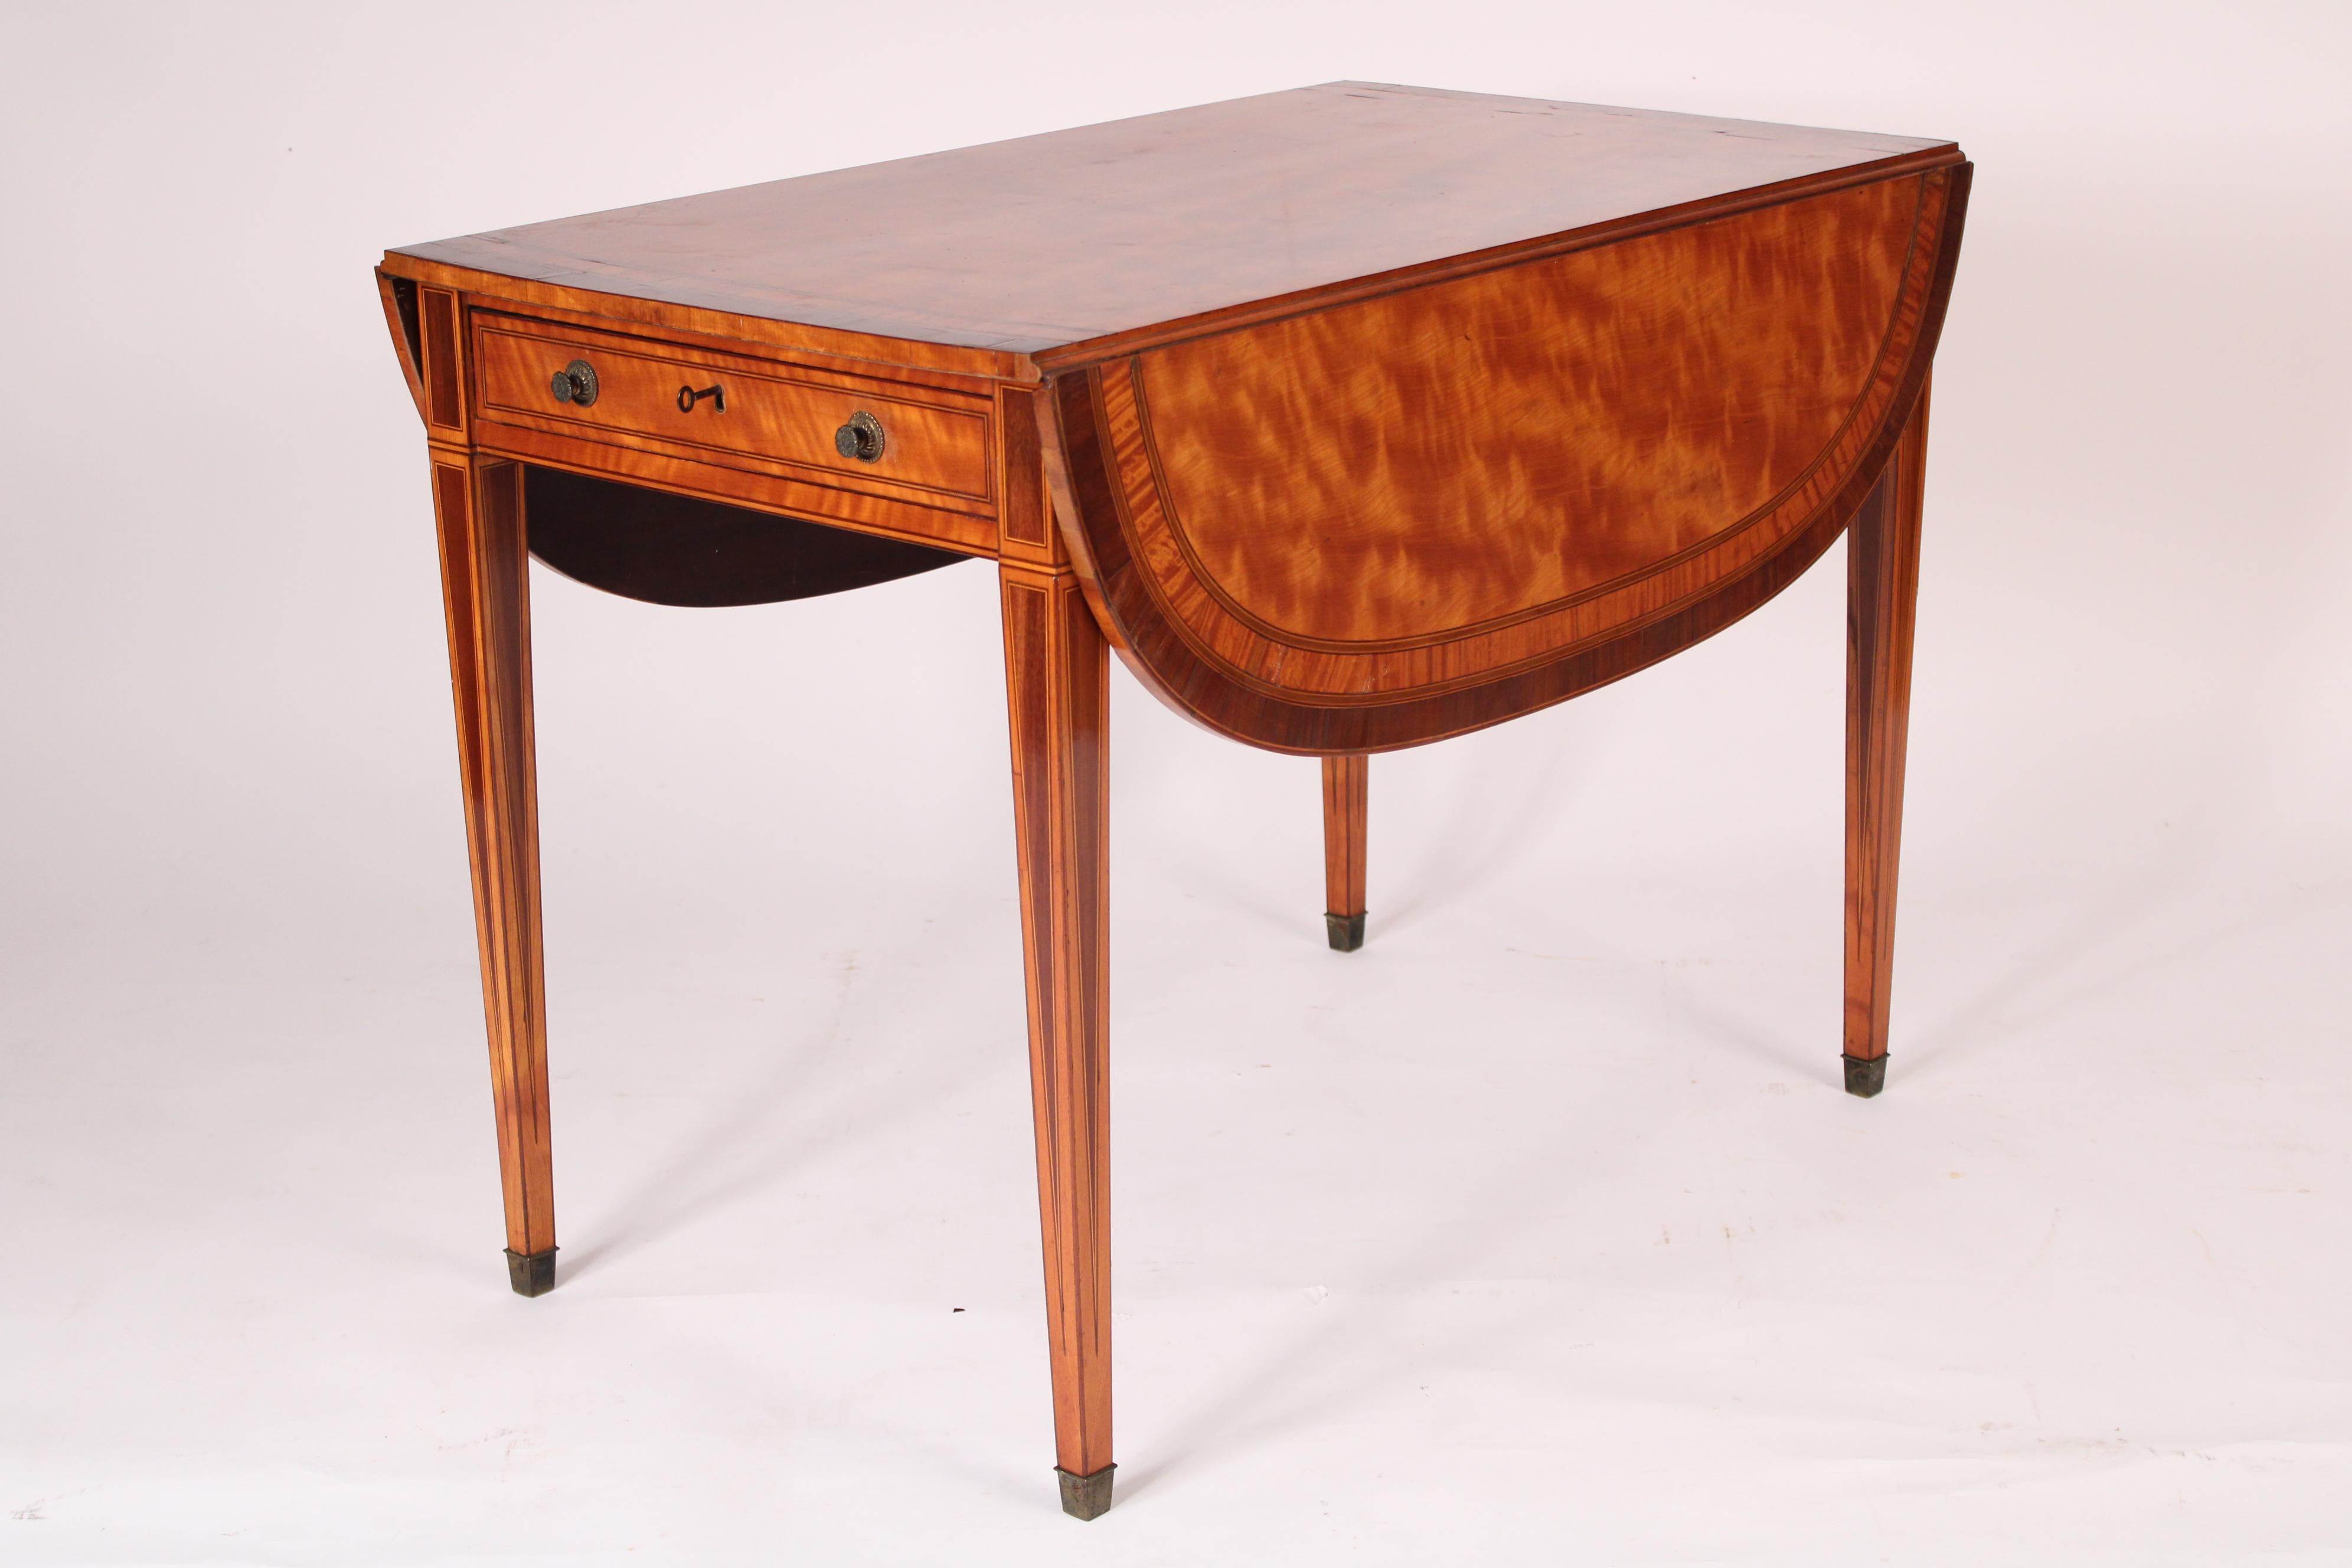 English Edwardian satinwood pembroke table, circa 1900. With a satinwood rectangular top with mahogany crossbanding and stringing, 2 D shaped drop leaves, a frieze drawer with two brass knobs, resting on square tapered satinwood legs with mahogany